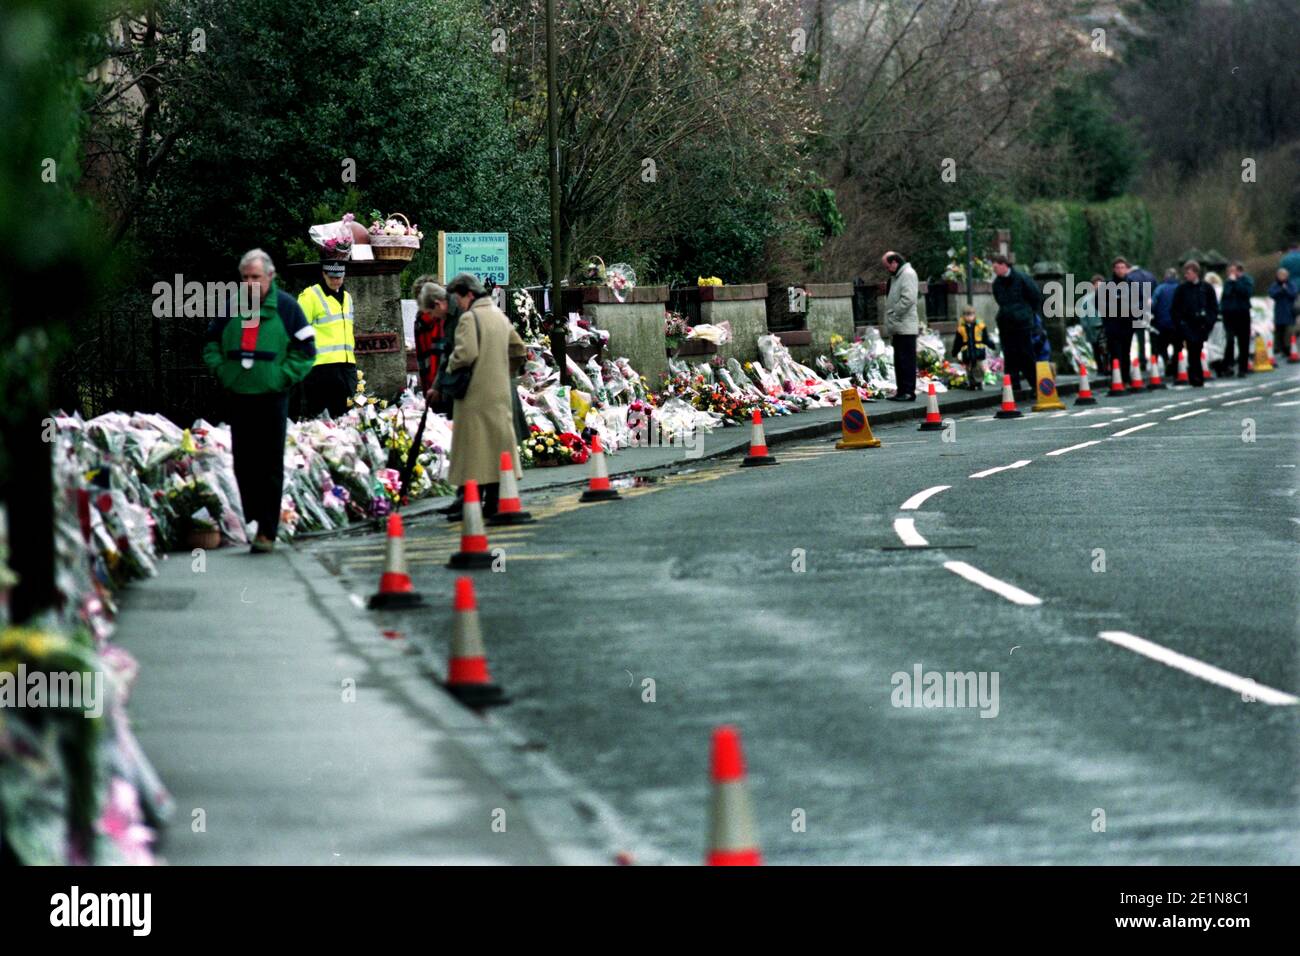 Dunblane School Massacre 13 March 1996. Photos take 14 march onwards. Wikipedia below: The Dunblane massacre took place at Dunblane Primary School near Stirling, Scotland, United Kingdom, on 13 March 1996, when Thomas Hamilton shot sixteen pupils and one teacher dead, and injured fifteen others, before killing himself. It remains the deadliest mass shooting in British history. Public debate about the killings centred on gun control laws, including public petitions for a ban on private ownership of handguns and an official inquiry, which produced the 1996 Cullen Report. Stock Photo